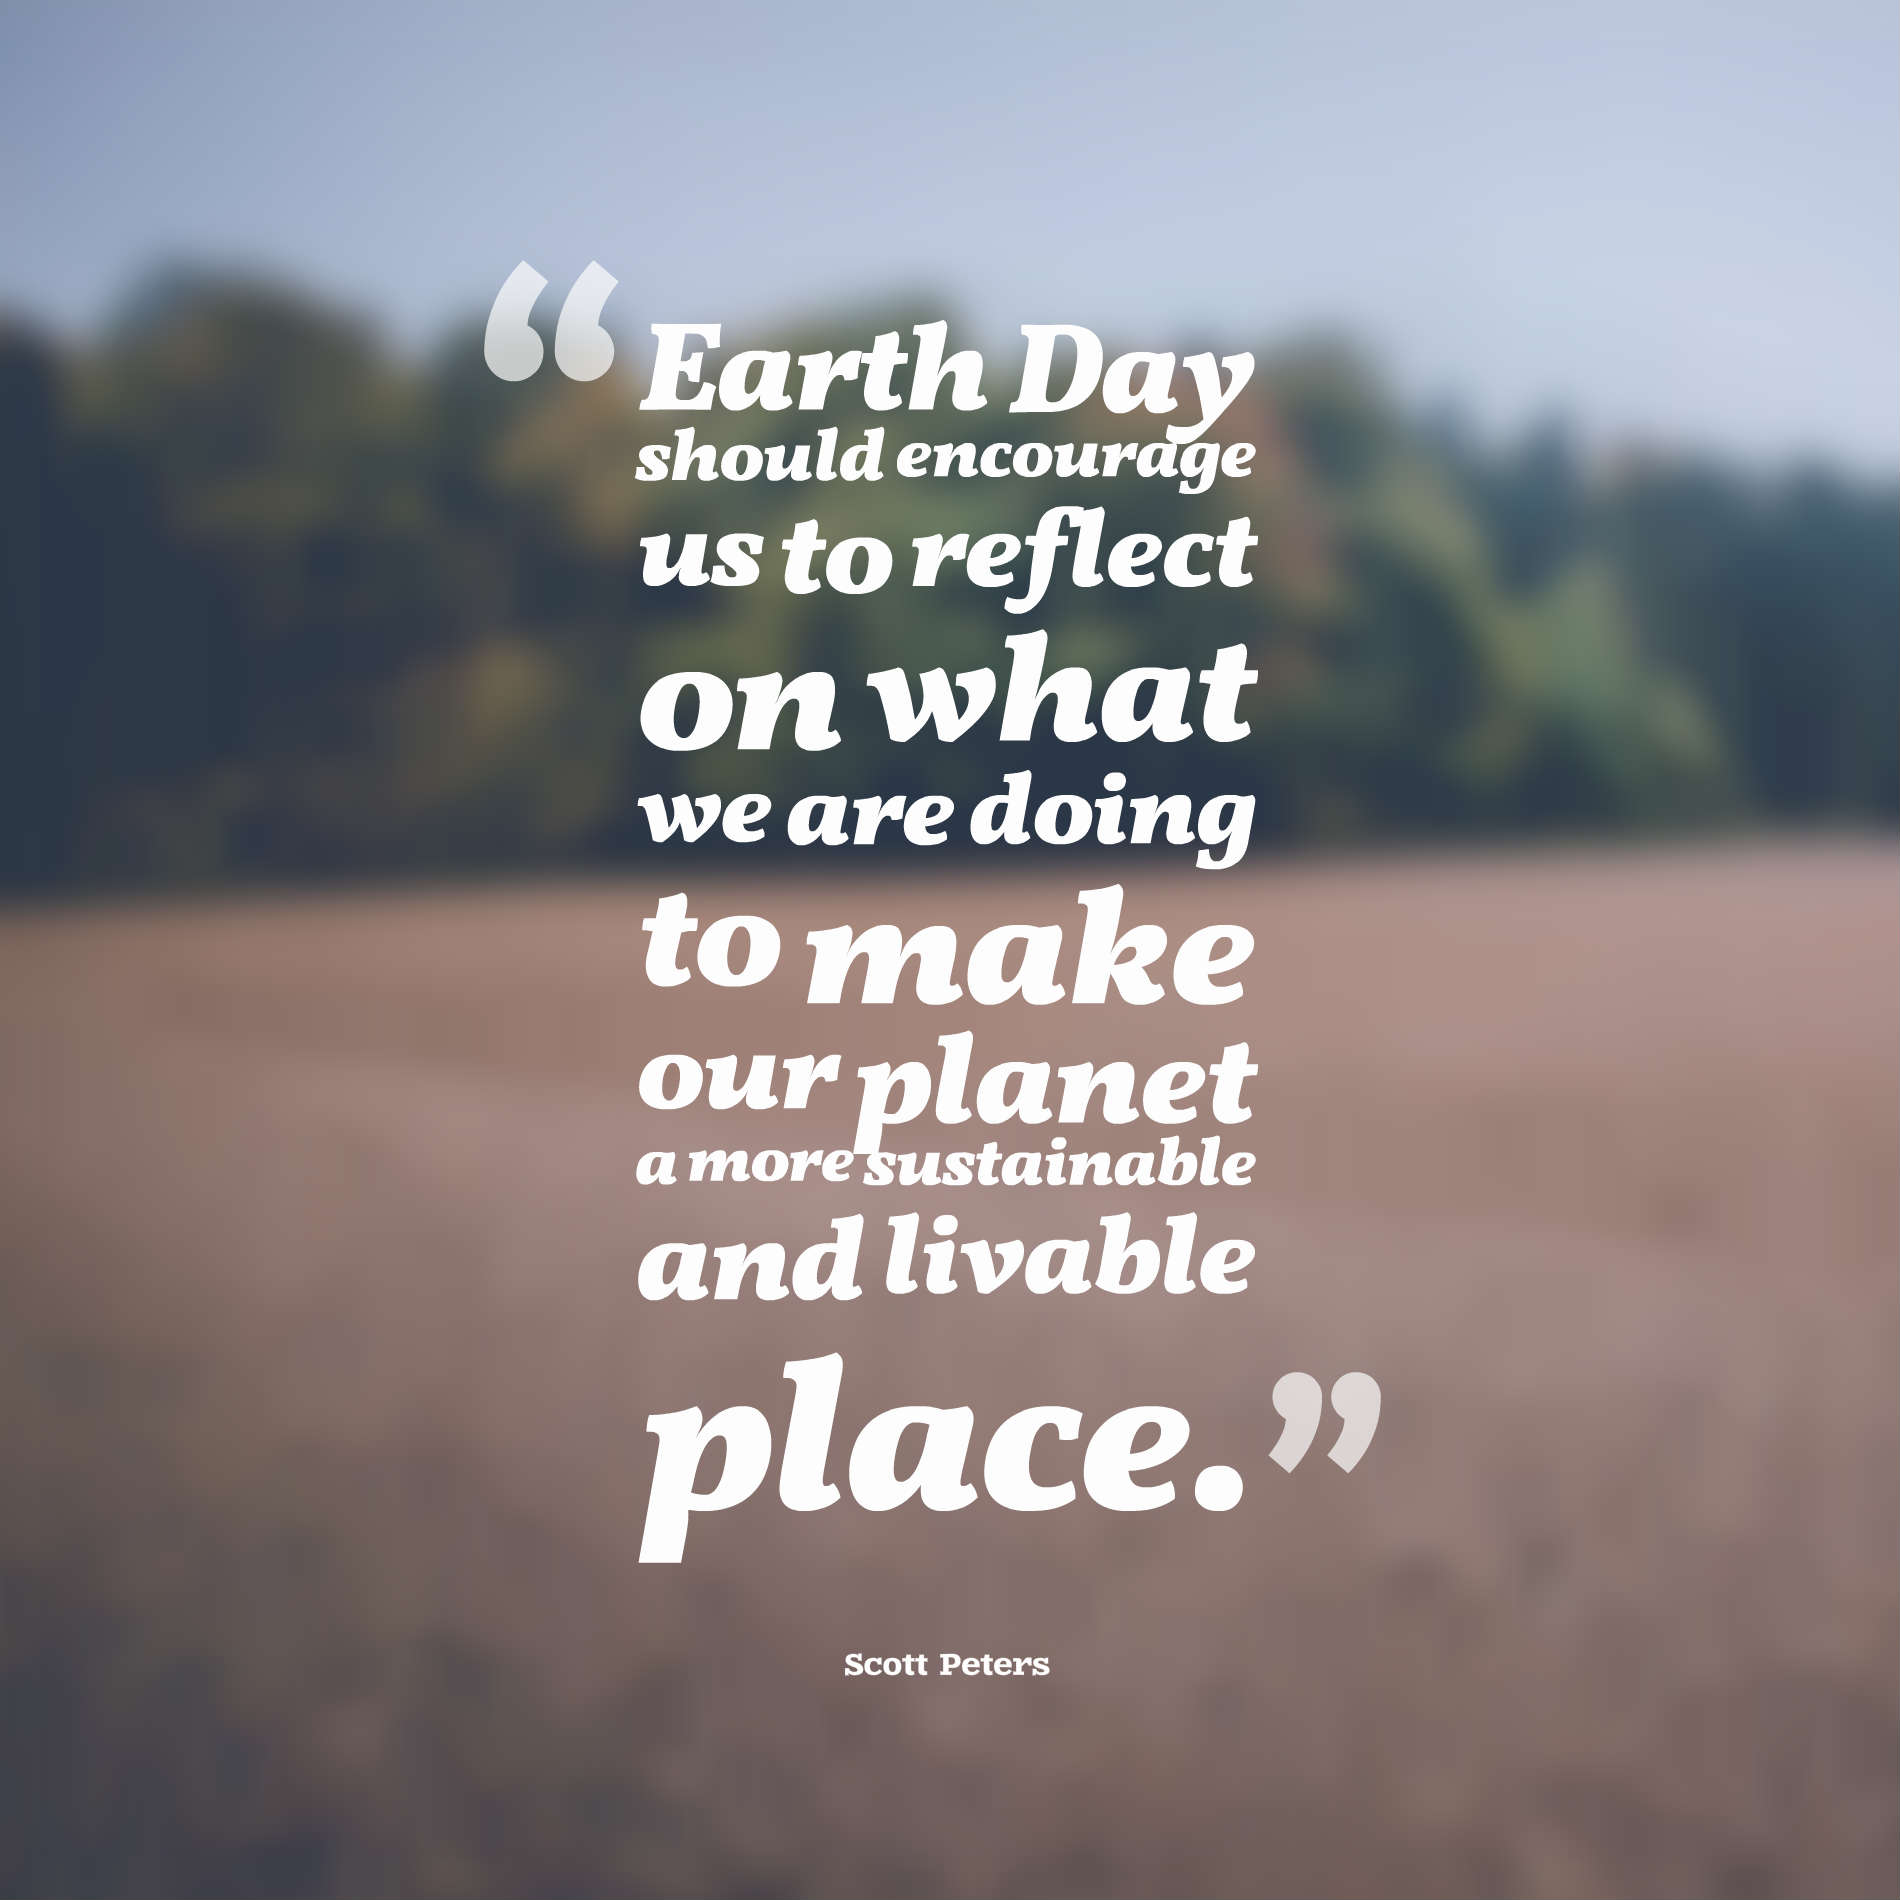 Earth Day should encourage us to reflect on what we are doing to make our planet a more sustainable and livable place.